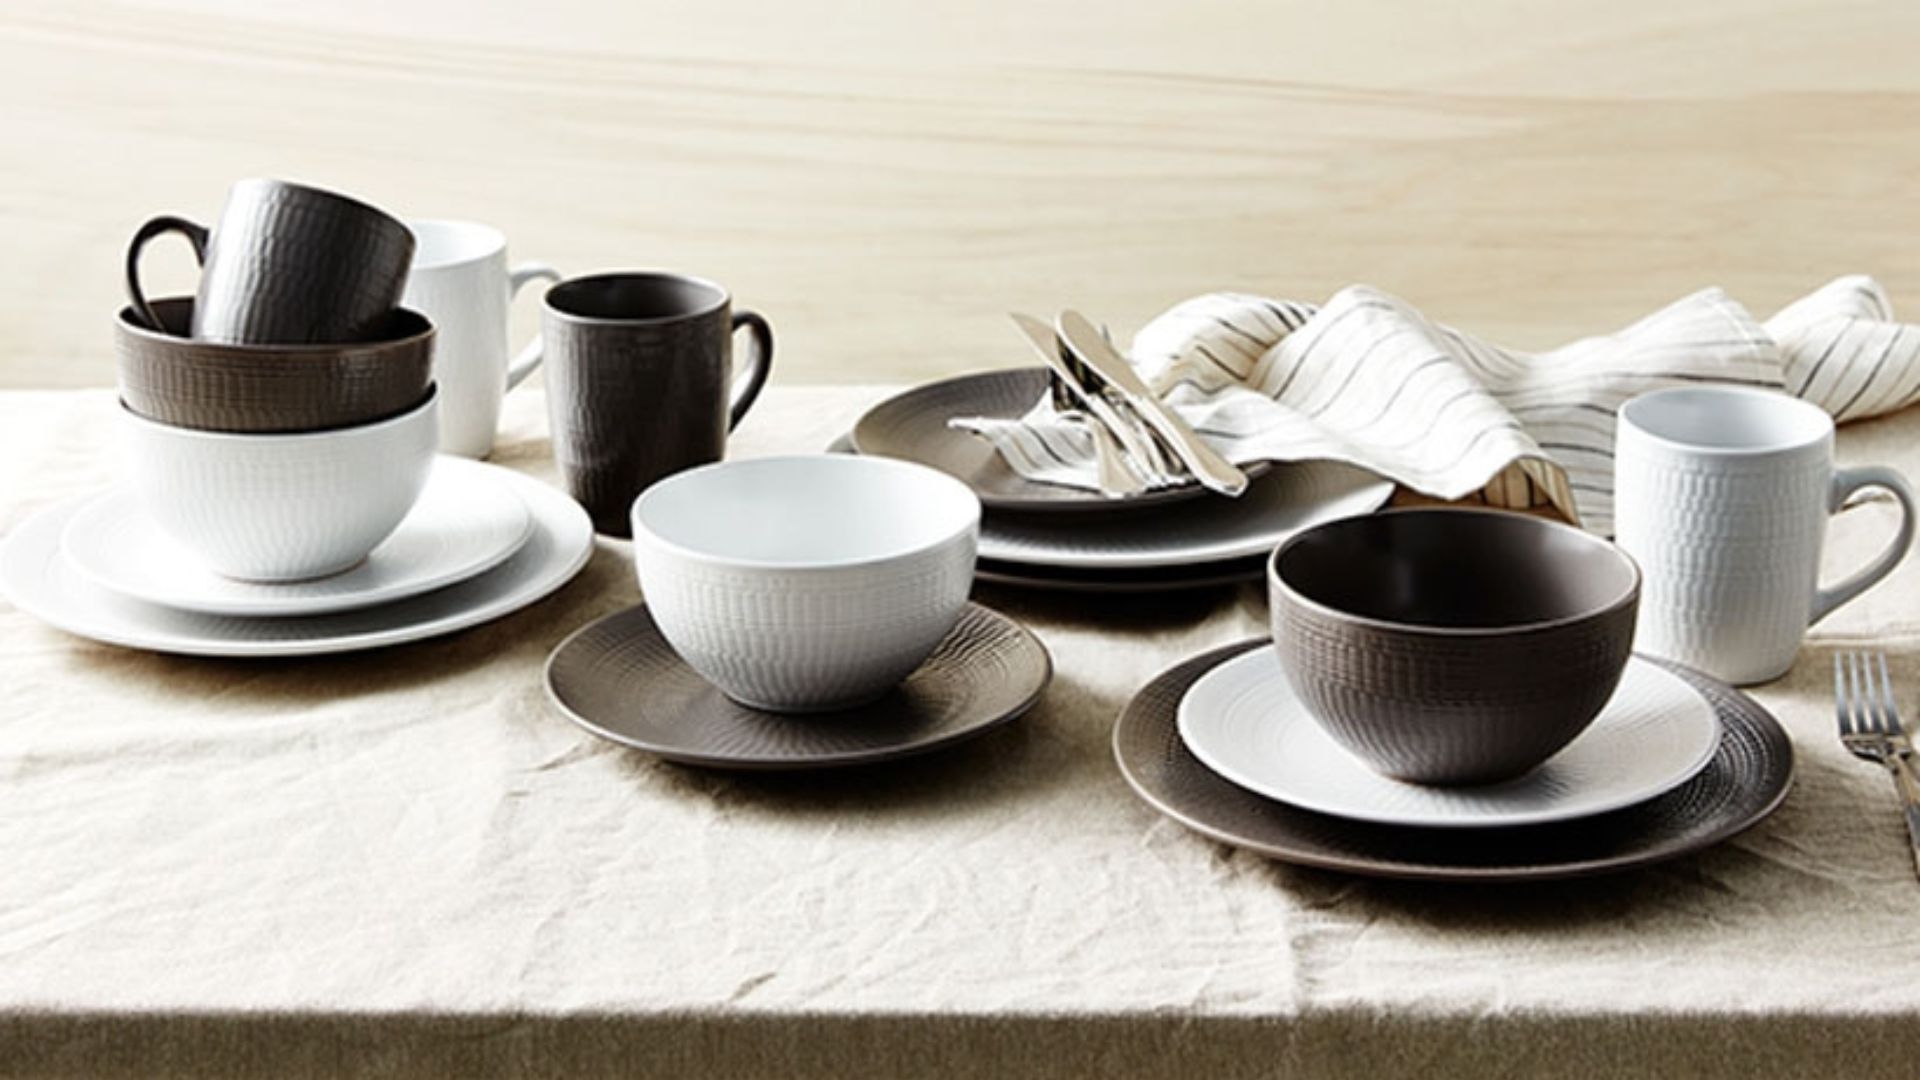 What is Bone China? - The Truth About Bone China